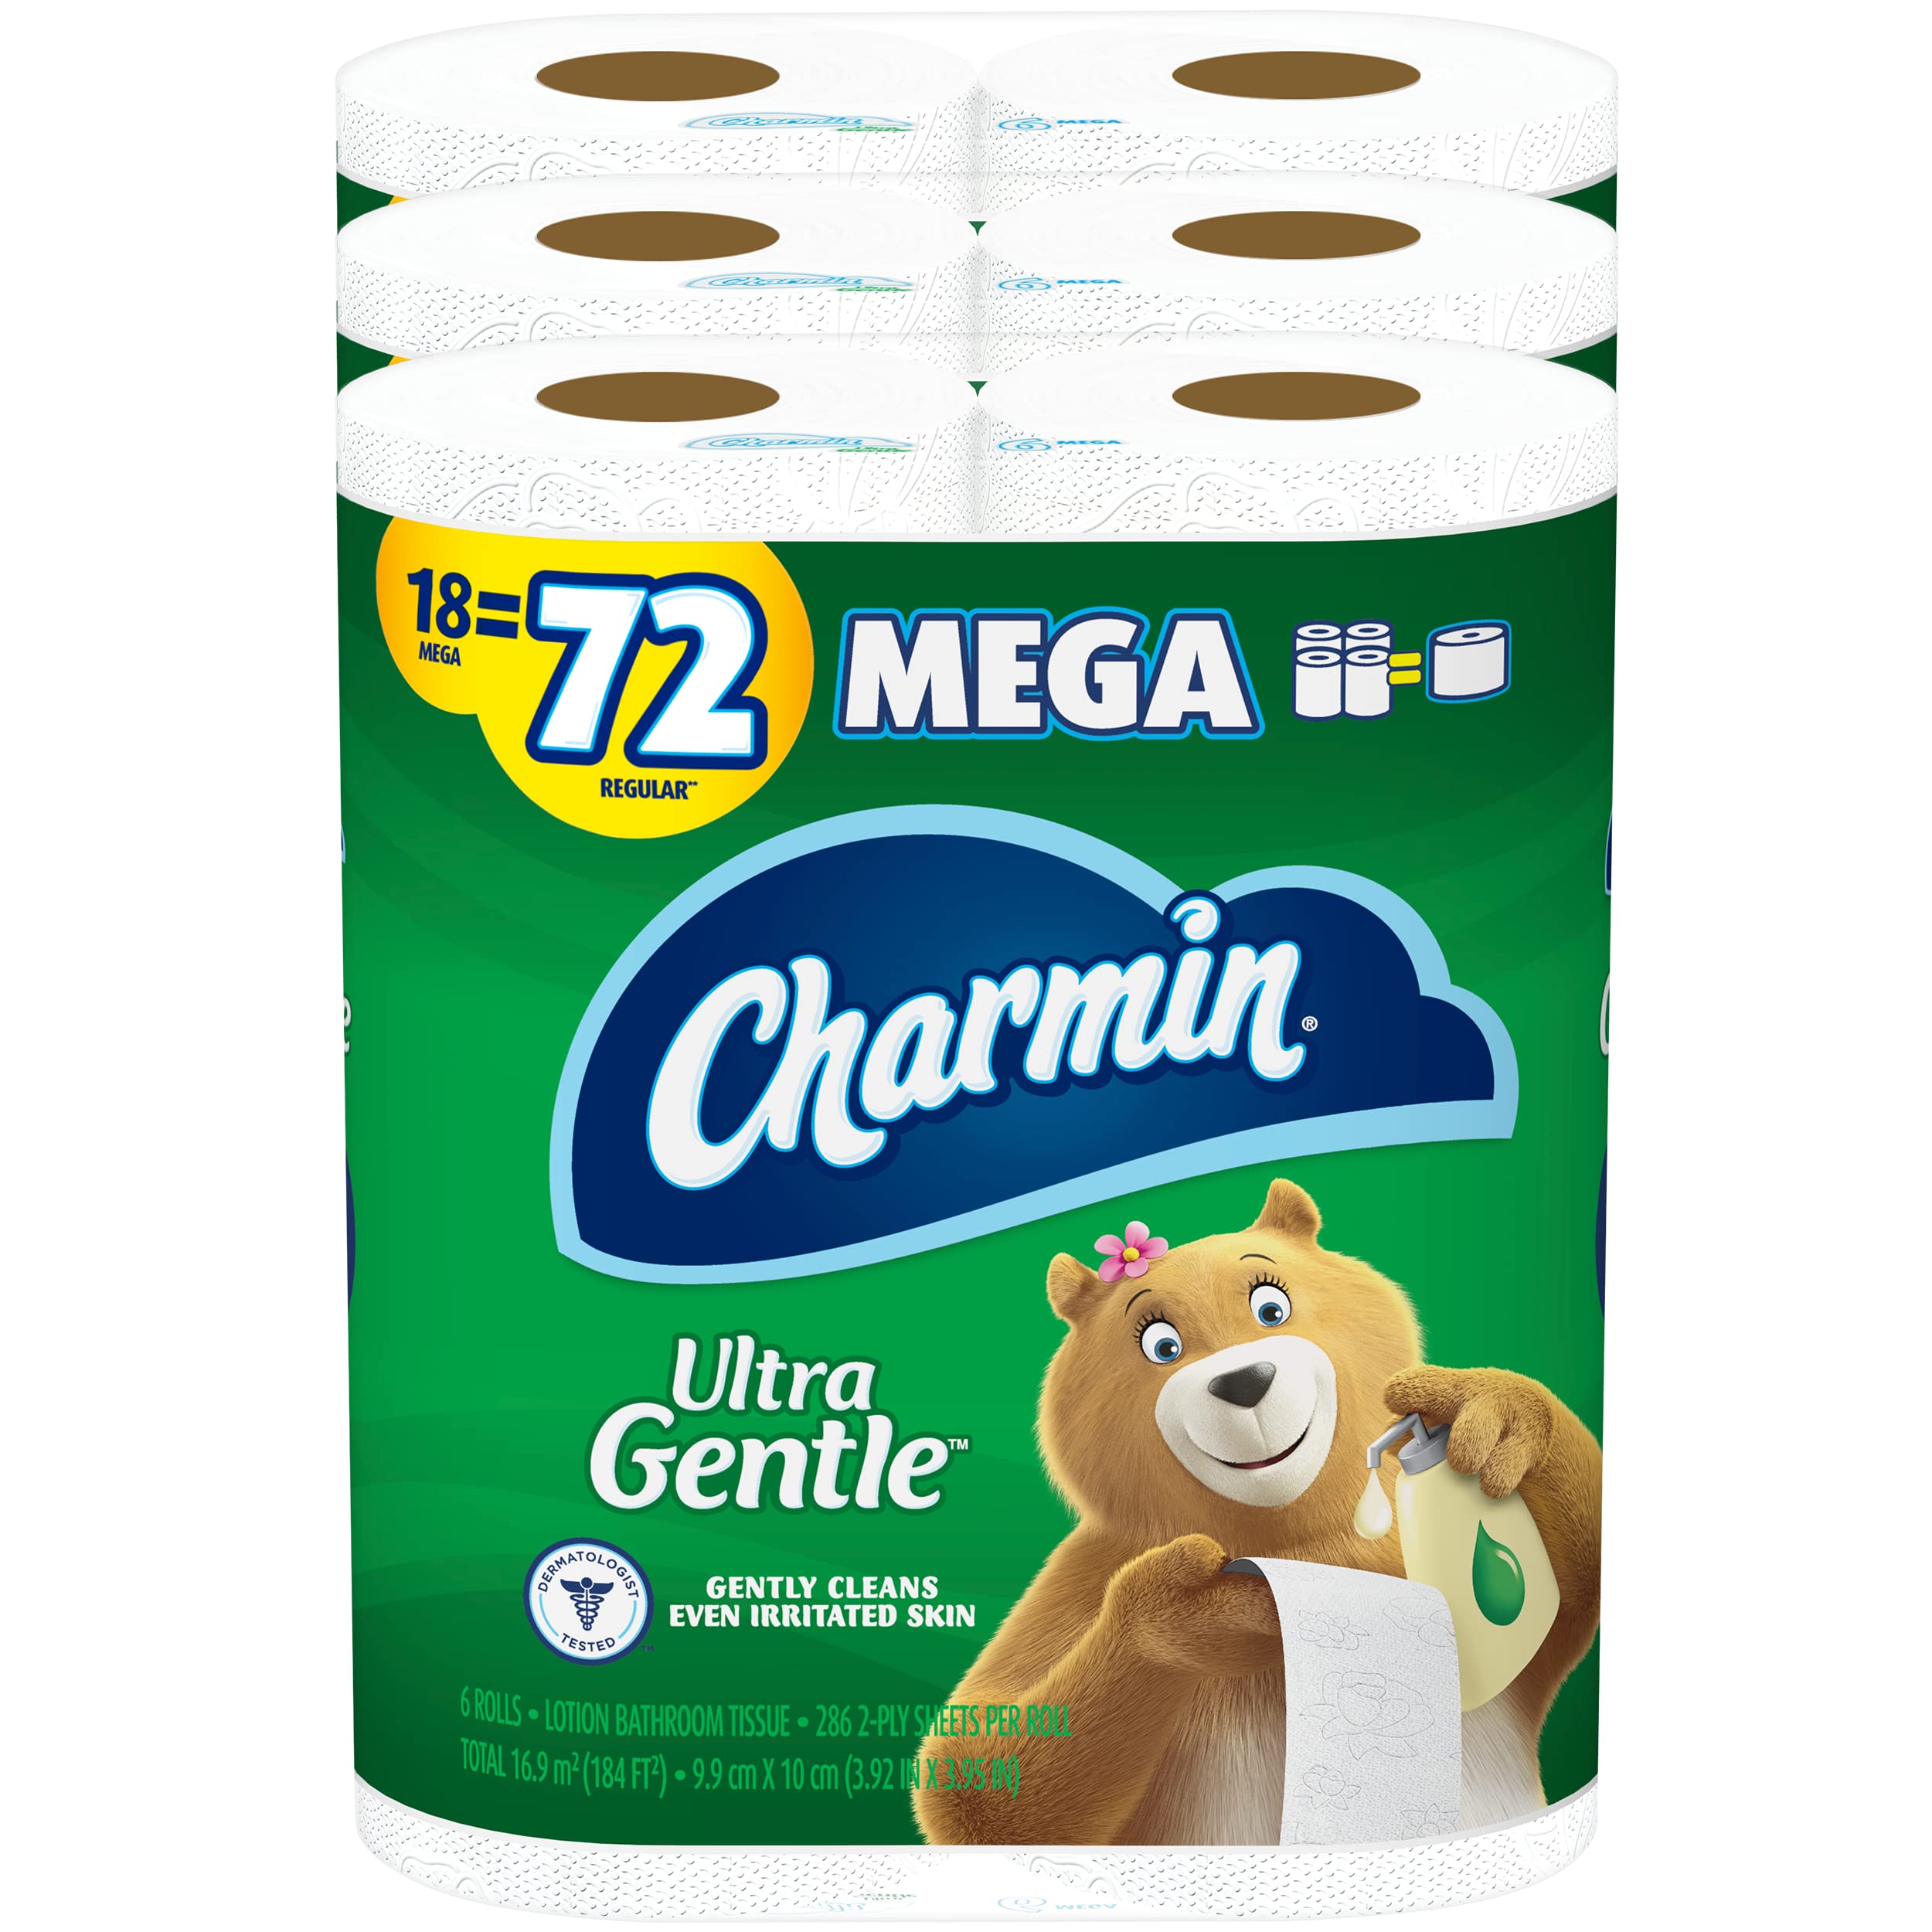 3-Count 18-Pack Charmin Mega Rolls Ultra Gentle Toilet Paper $44.95 ($14.98 each) + Free Shipping